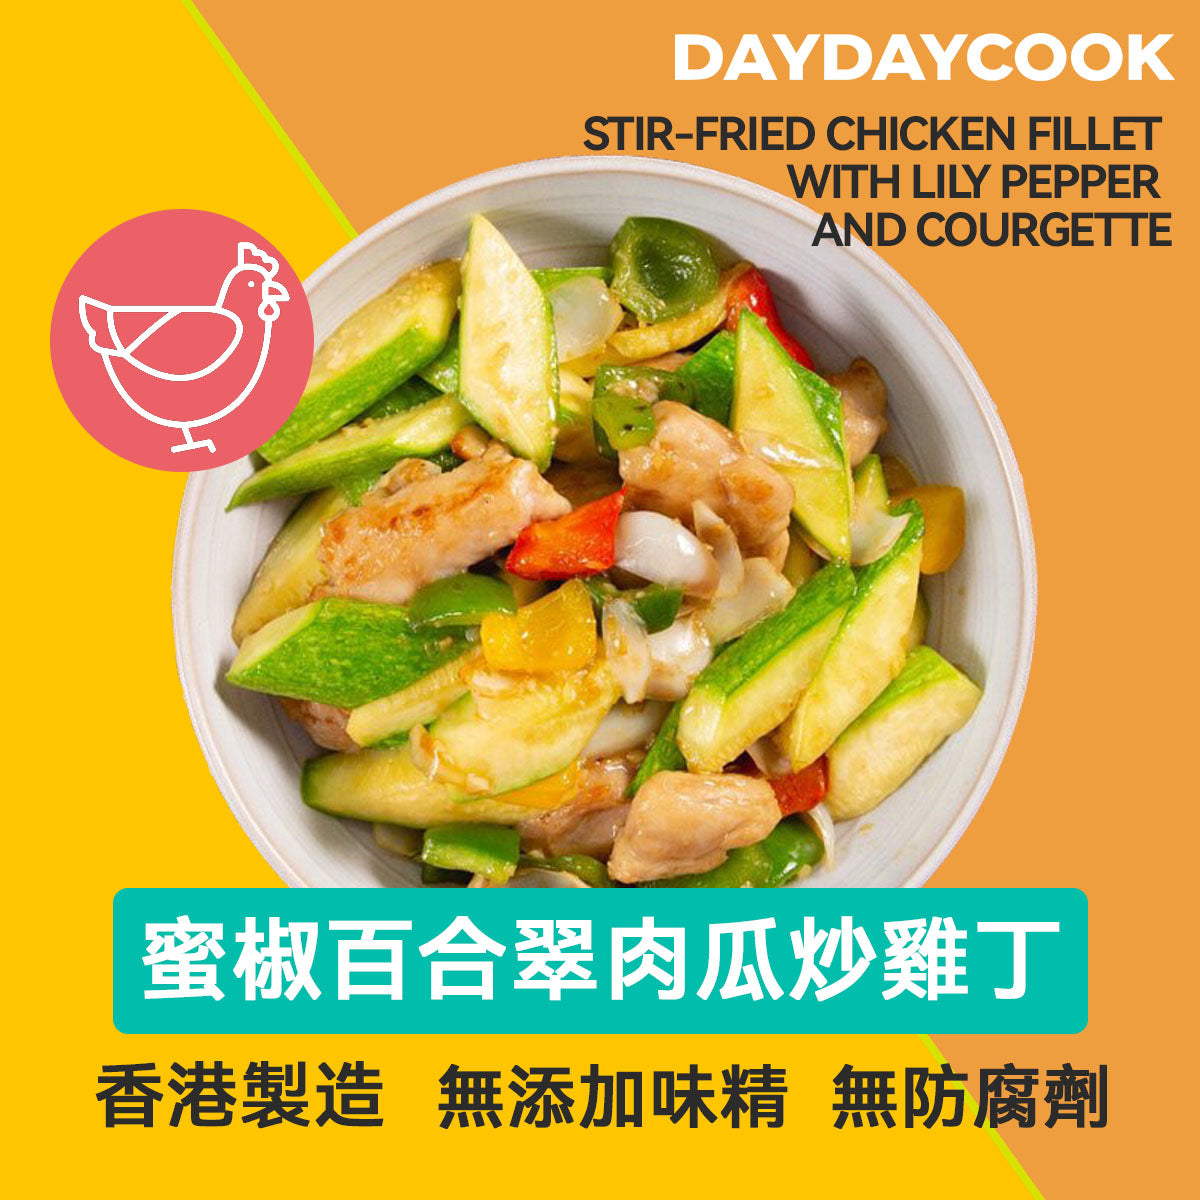 Stir-fried chicken fillet with lily pepper and courgette